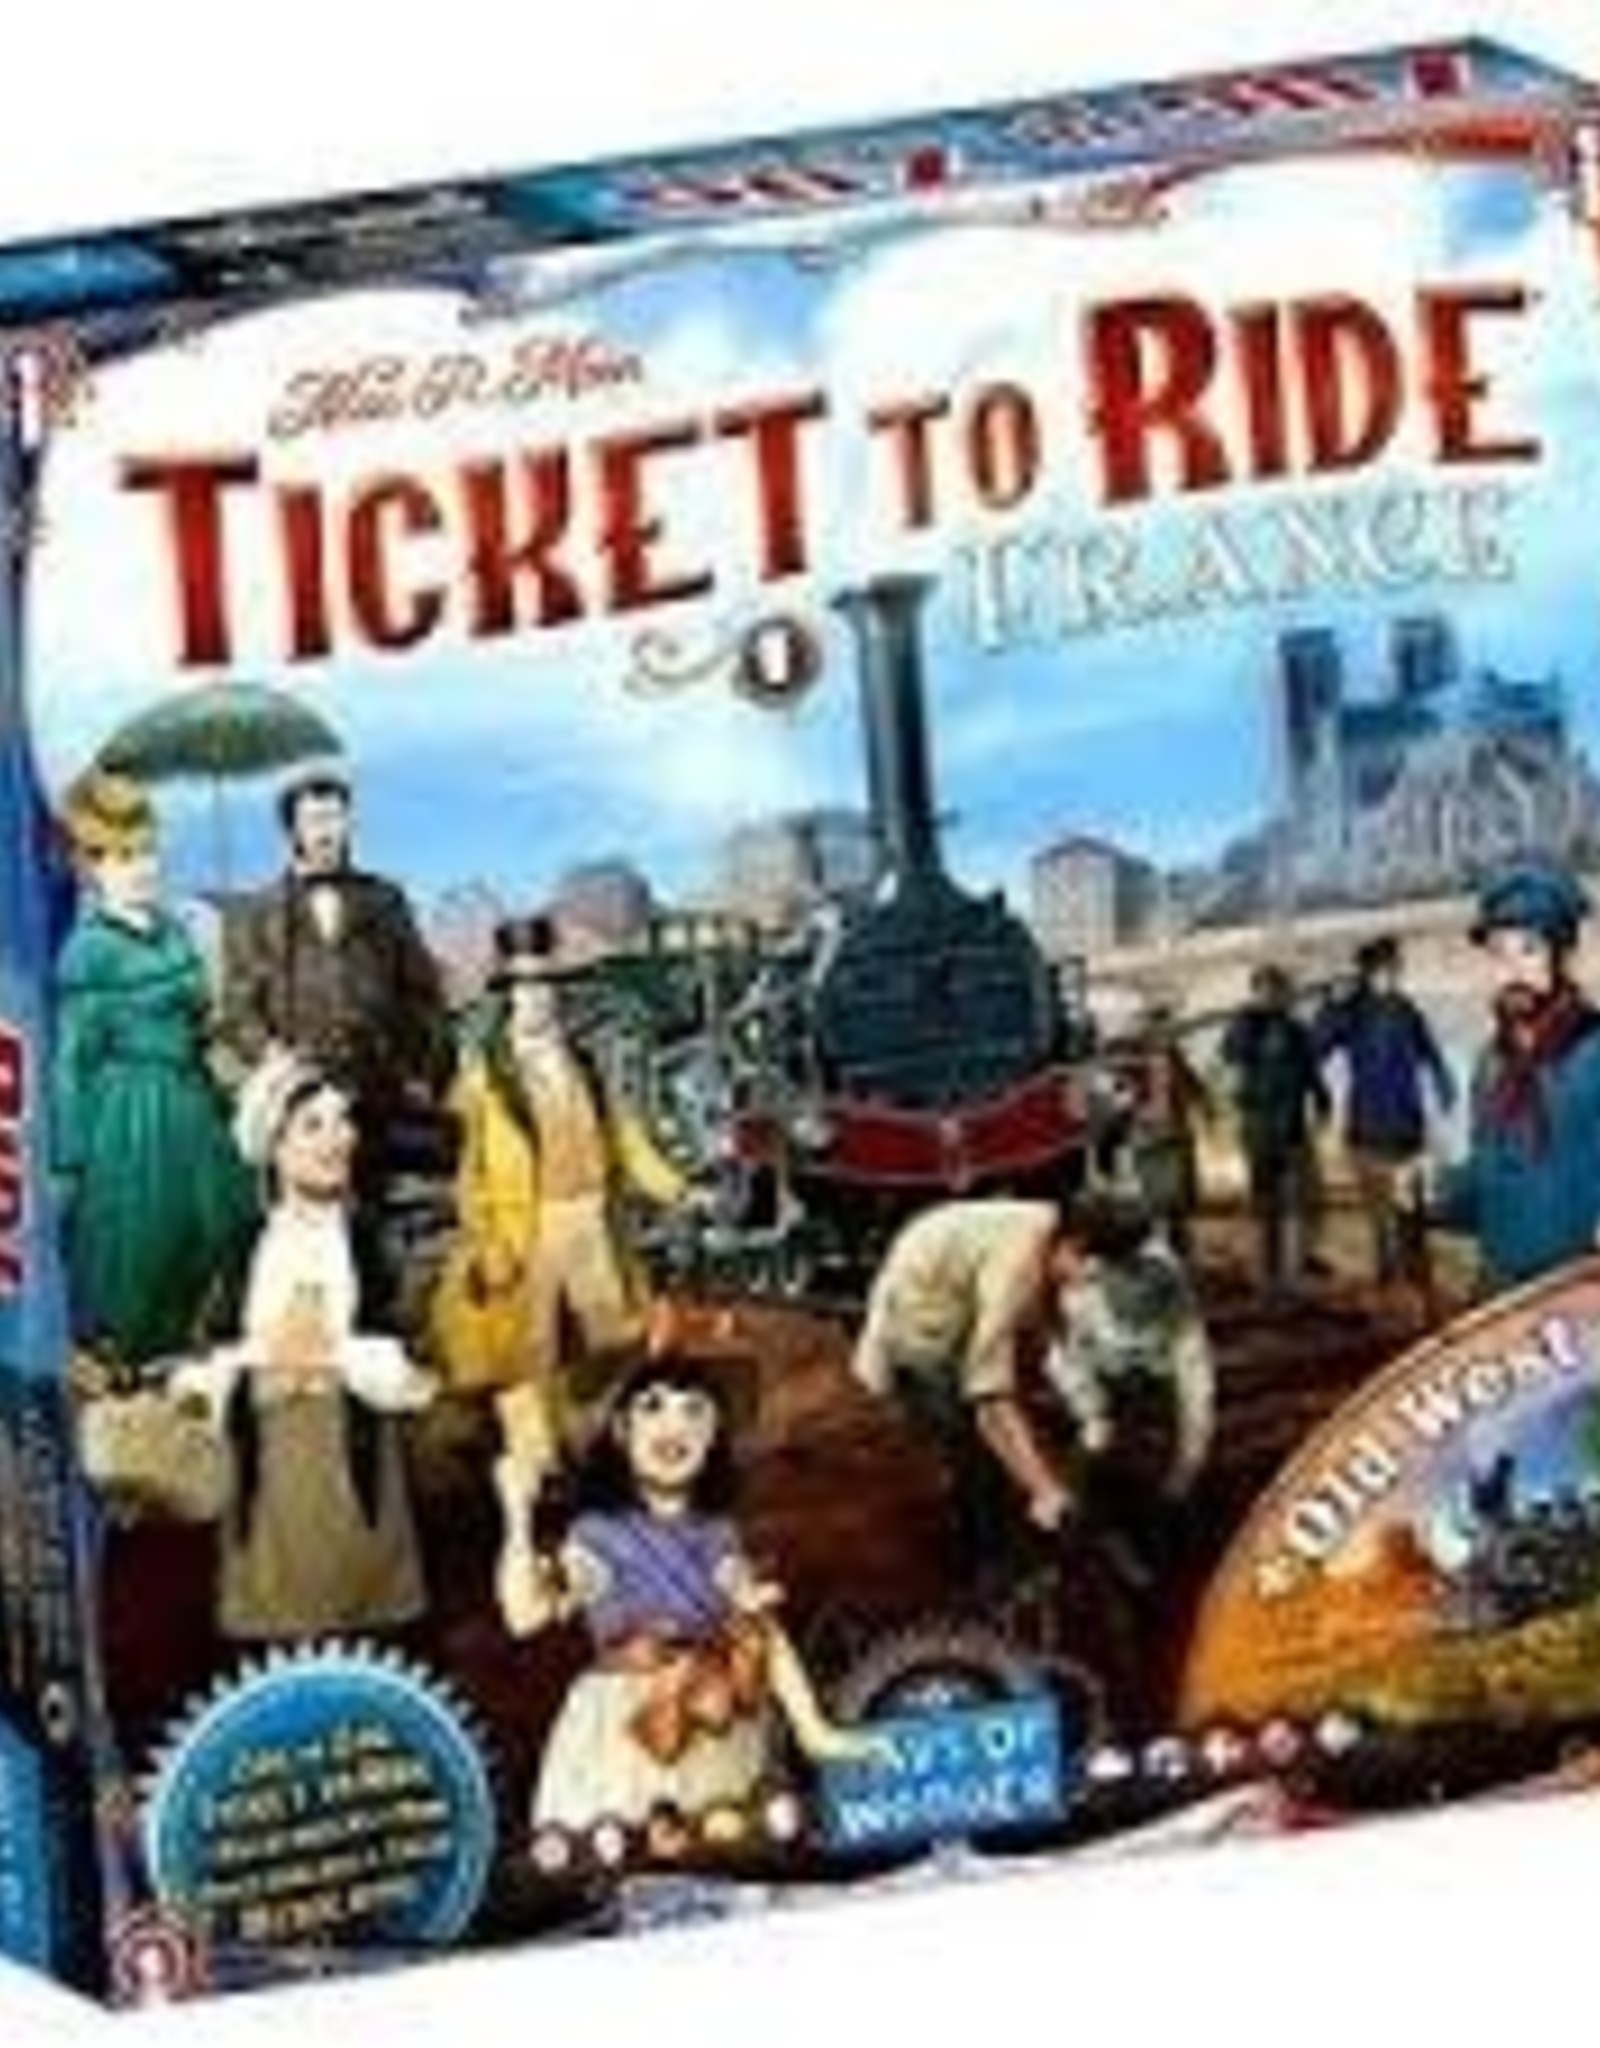 Days of Wonder Ticket to Ride - France / Old West (Expansion #6)